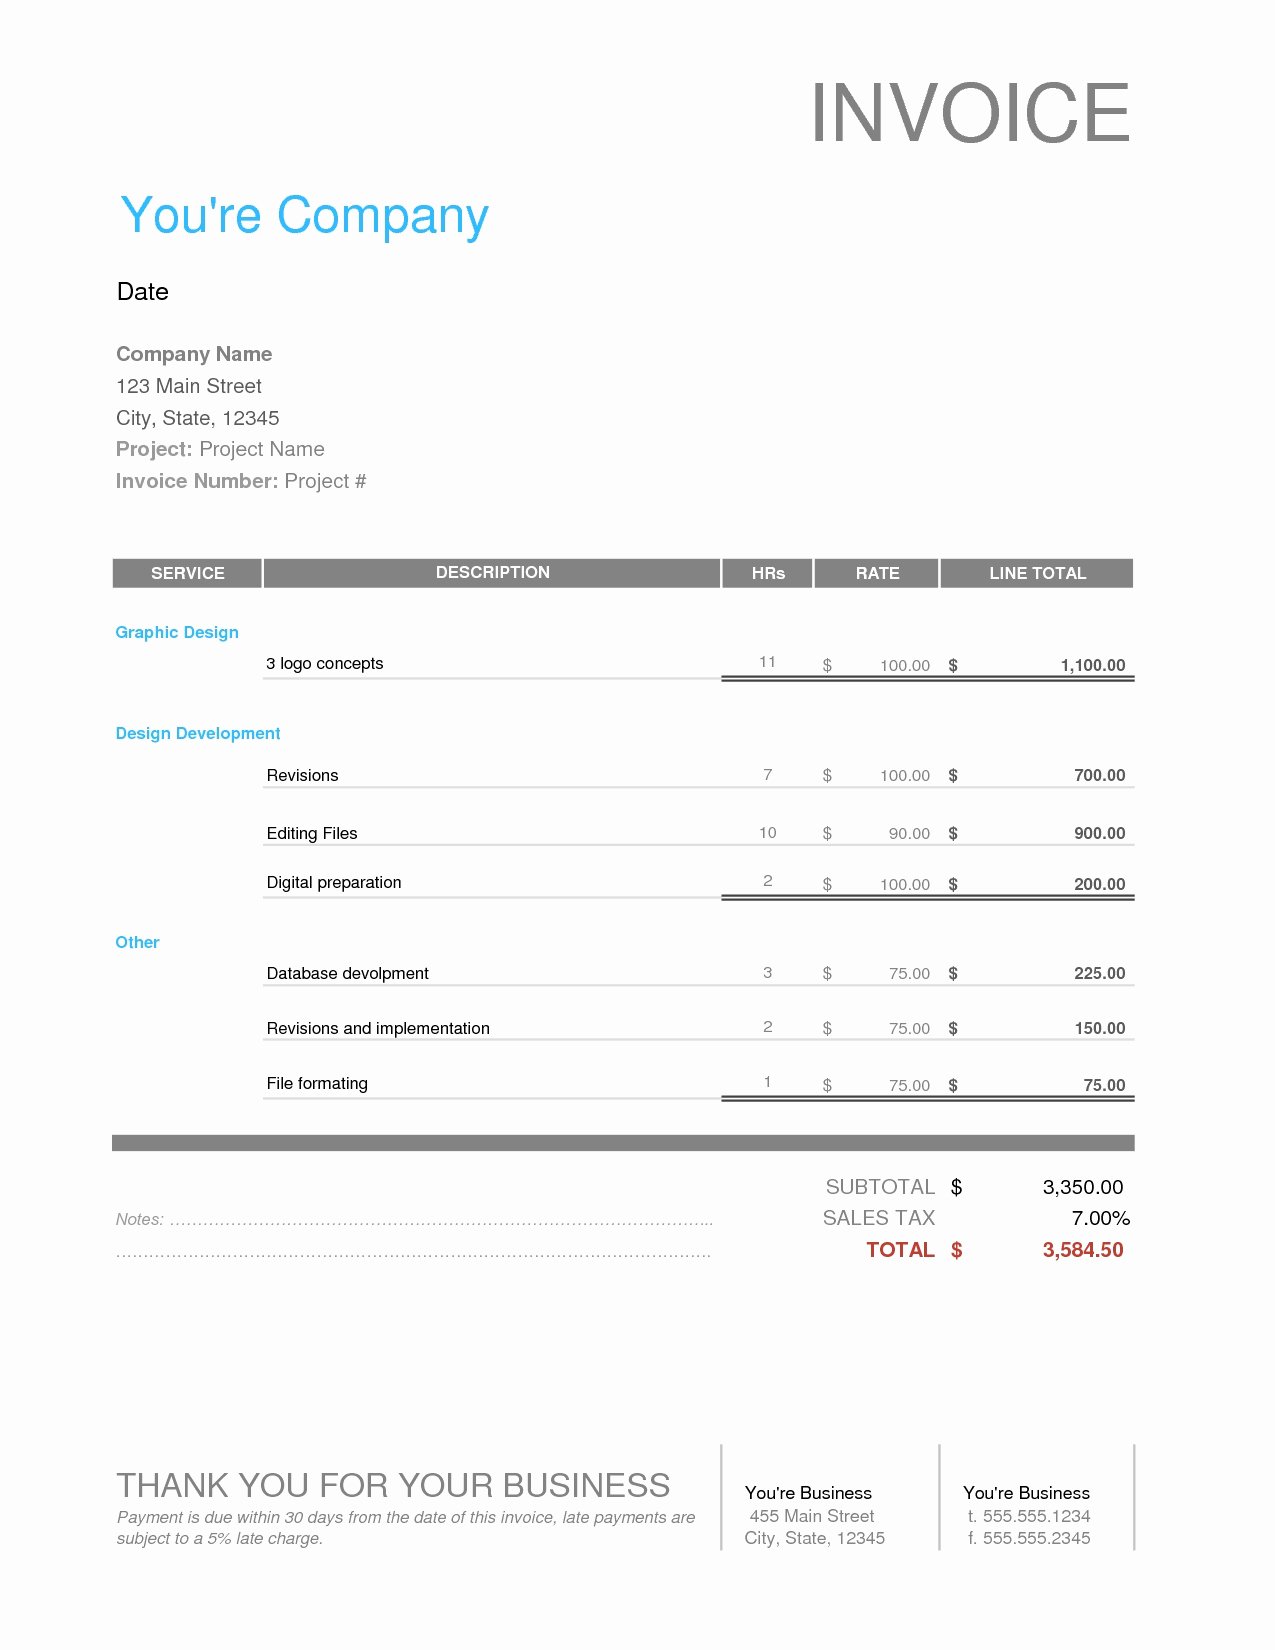 Freelance Design Invoice Template Awesome Graphic Design Freelance Invoice Invoice Template Ideas